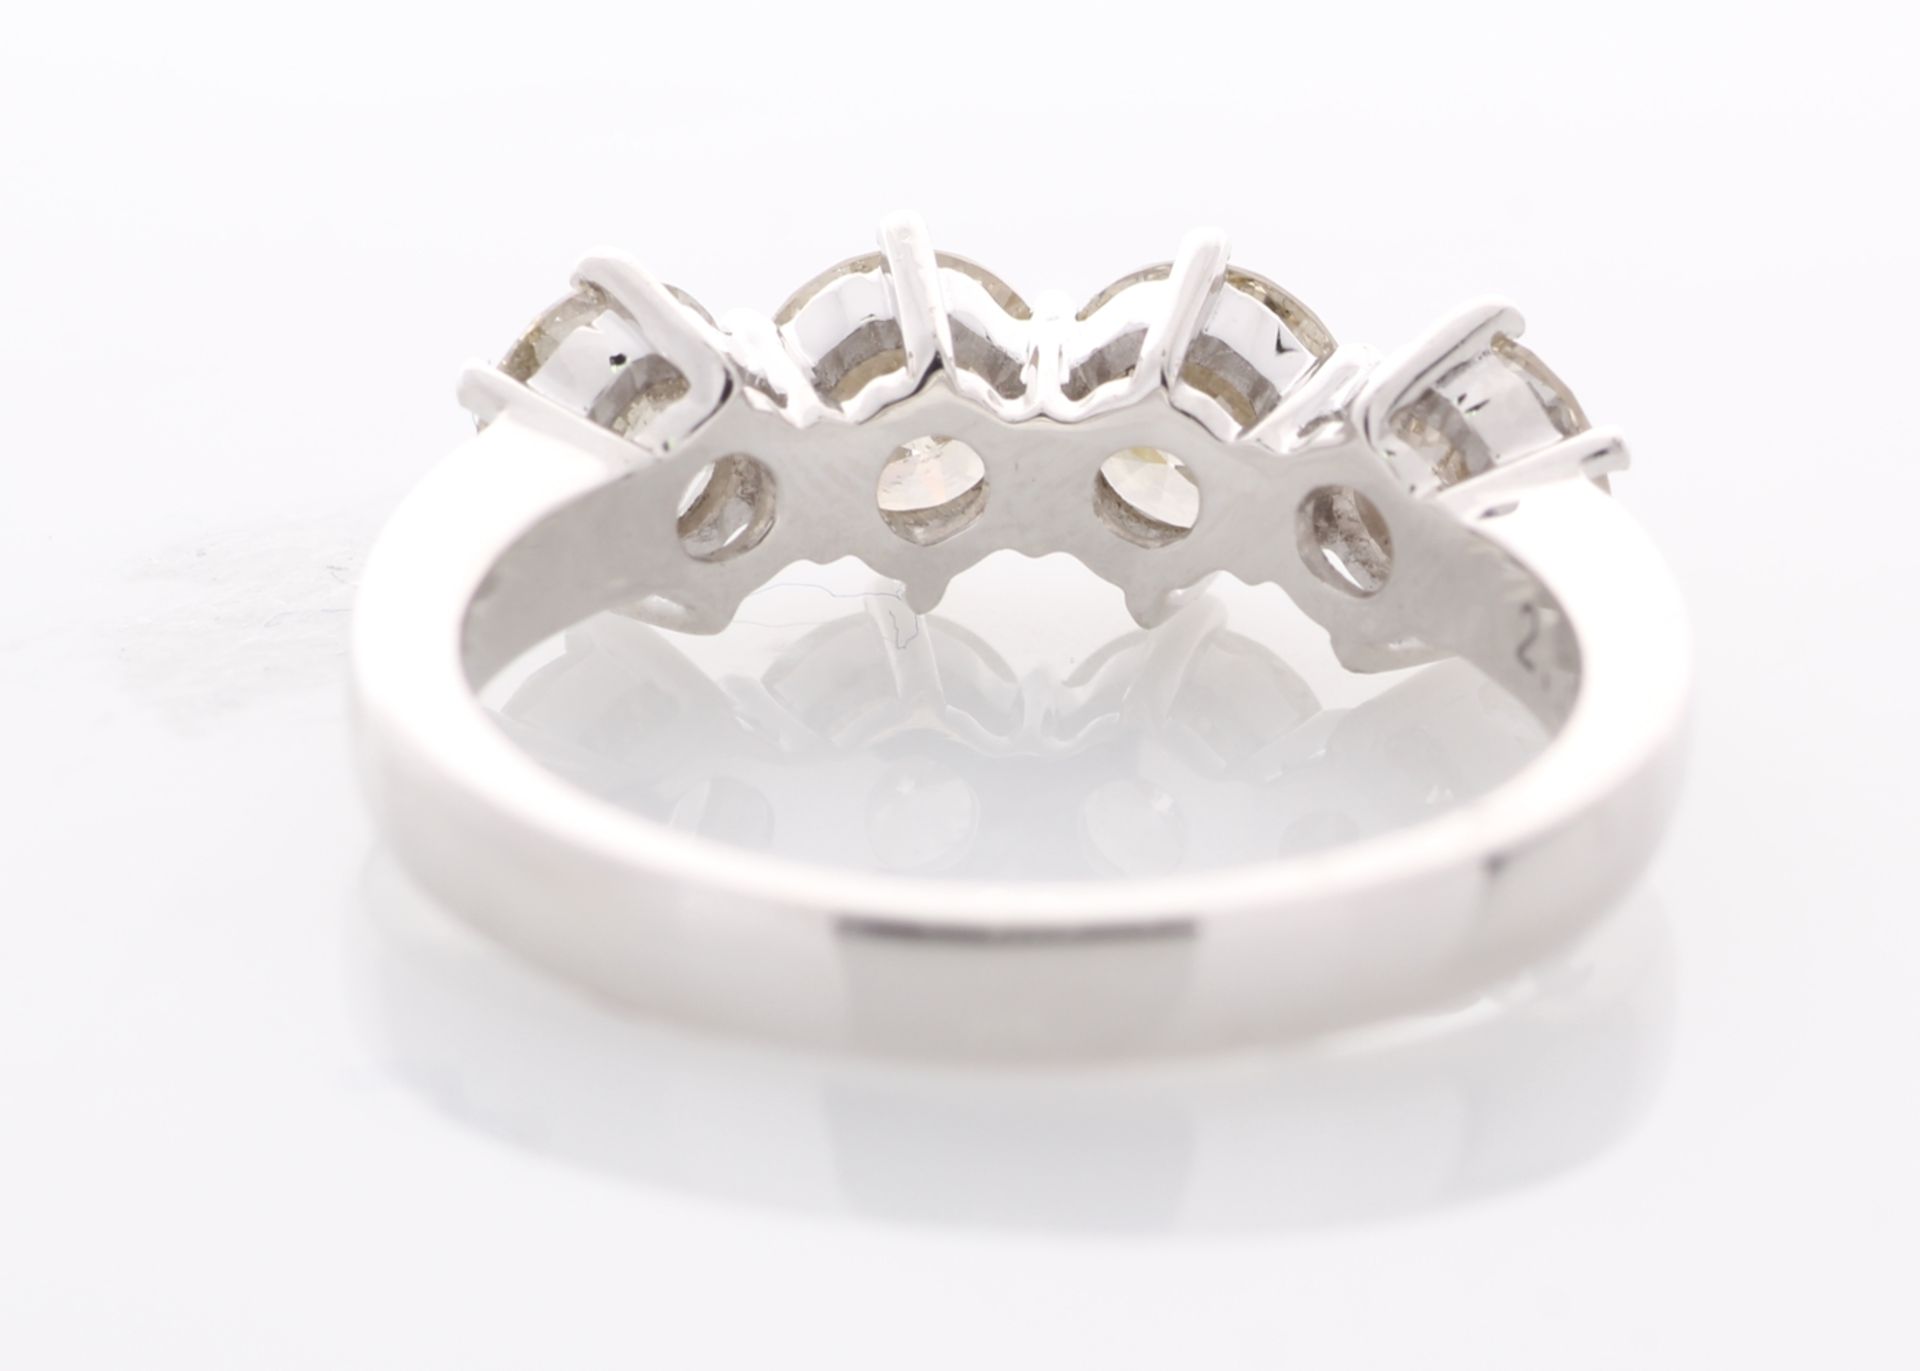 Valued by GIE £21,455.00 - 18ct White Gold Four Stone Claw Set Diamond Ring 2.10 Carats - 3145004, - Image 4 of 6